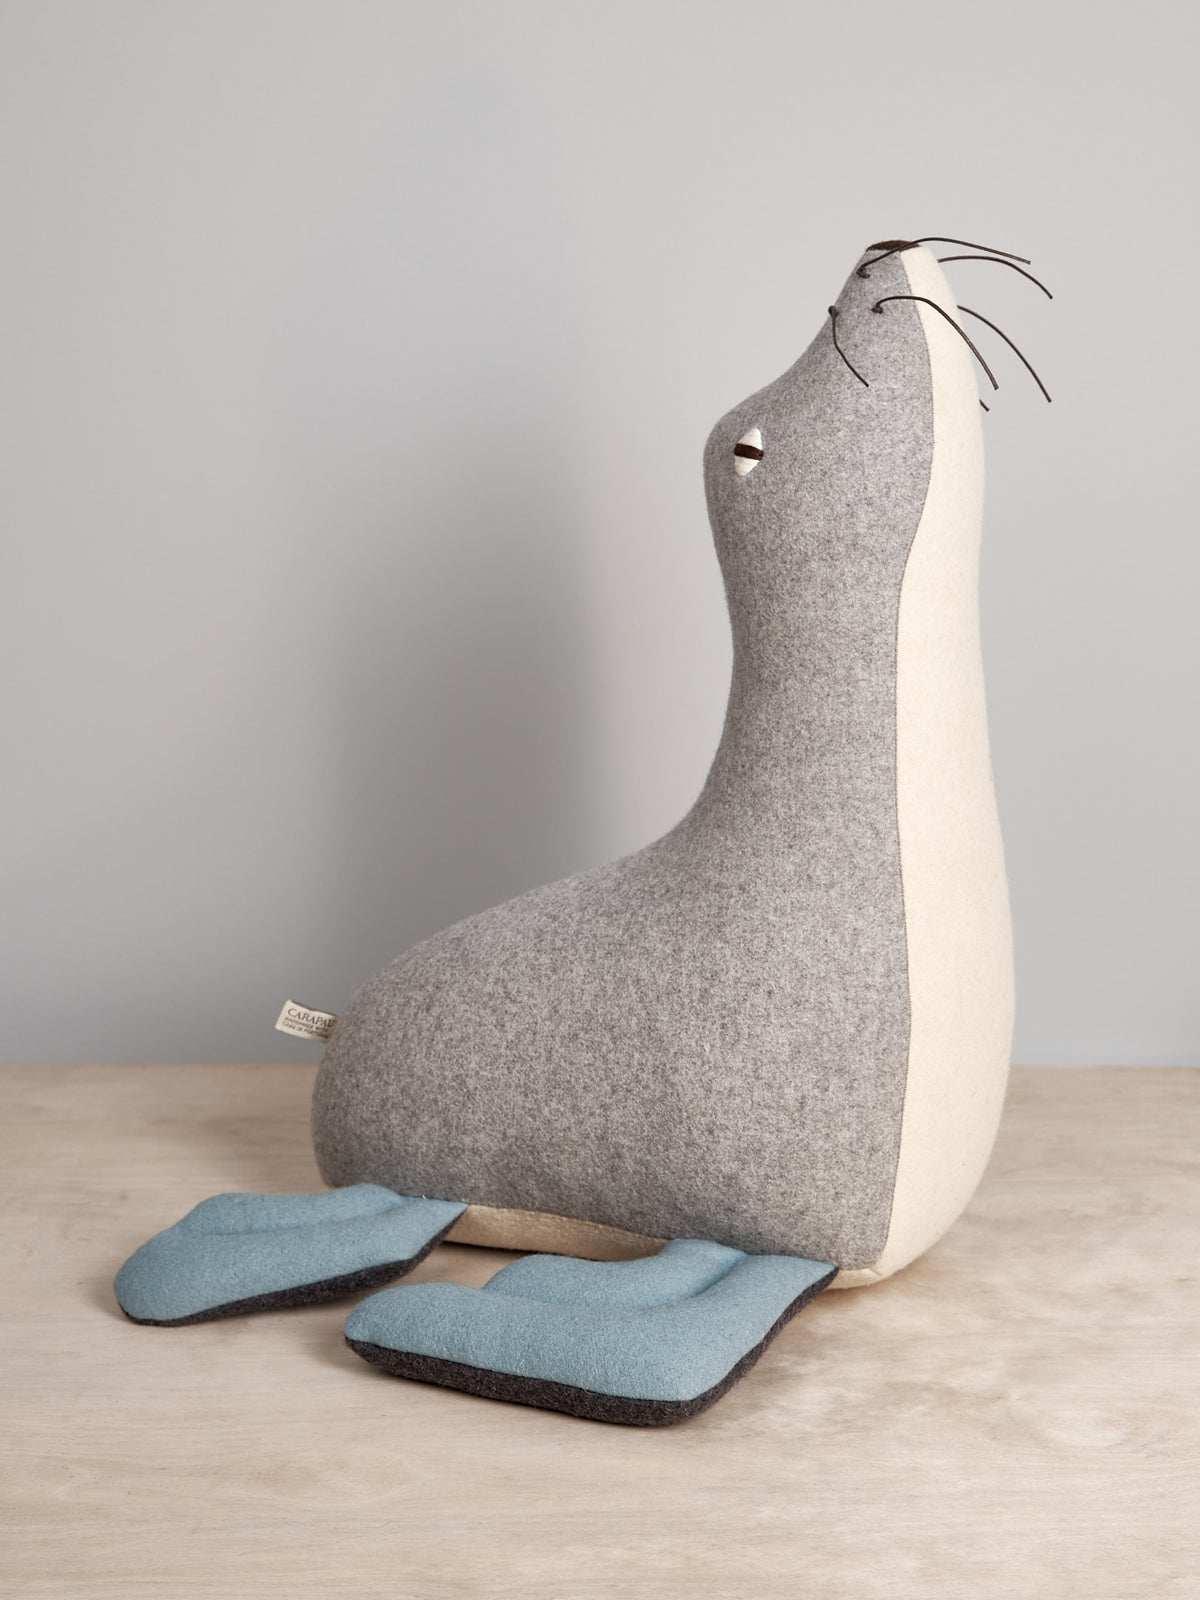 A grey and blue KALI, the Antarctic Fur Seal stuffed animal by Carapau on a table.